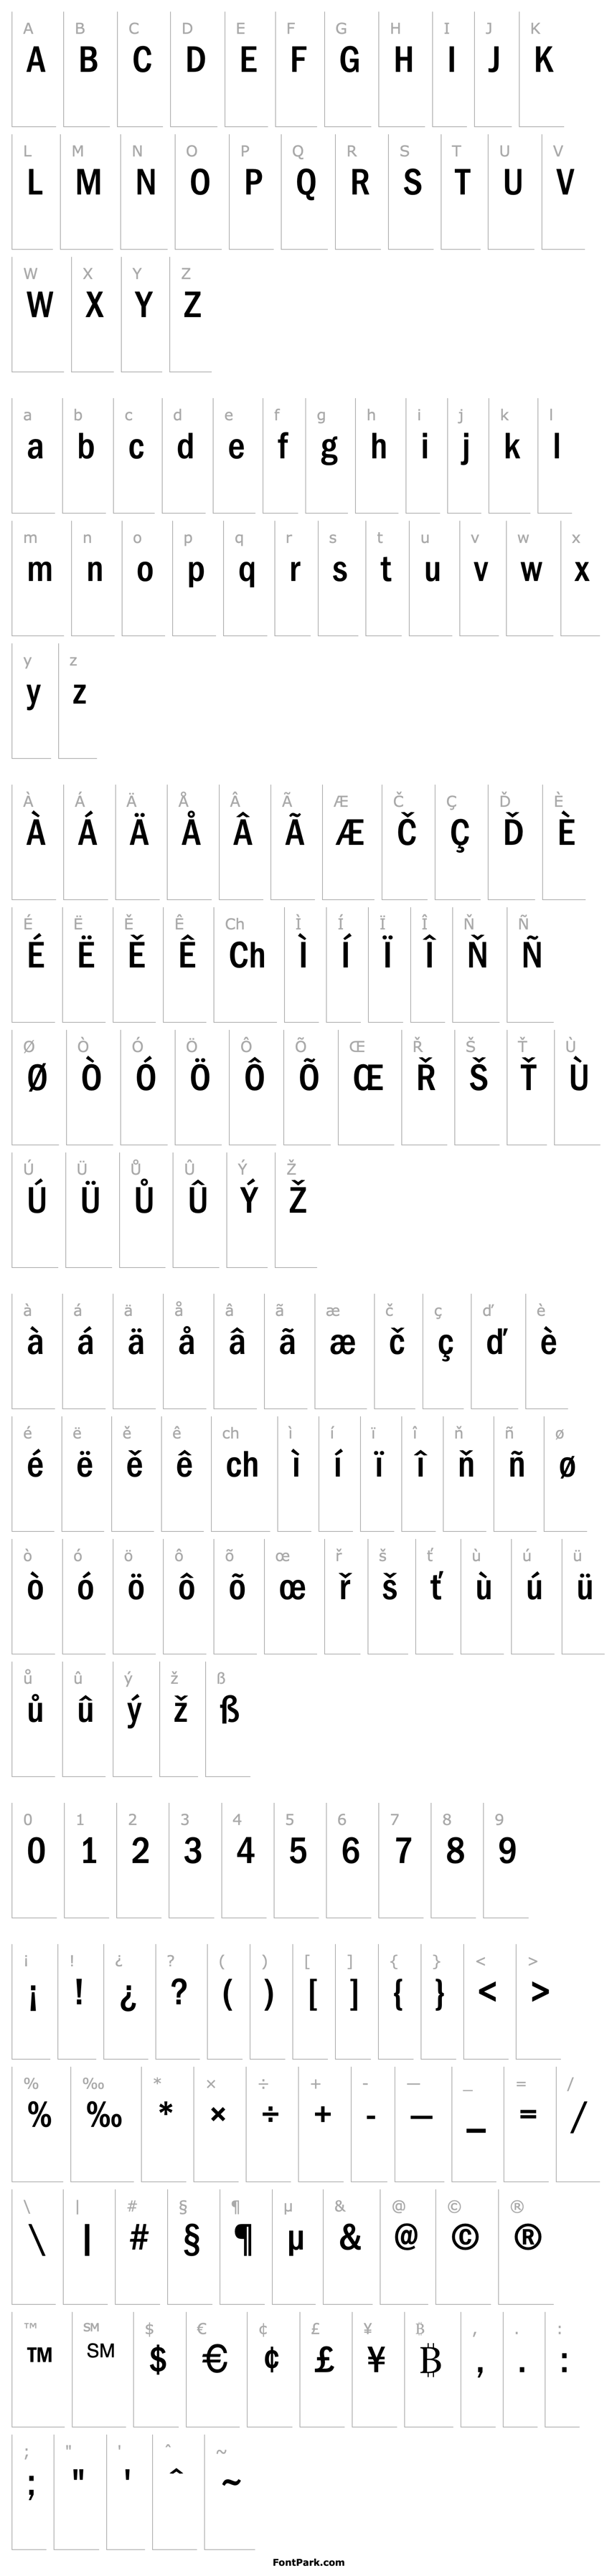 Overview font158